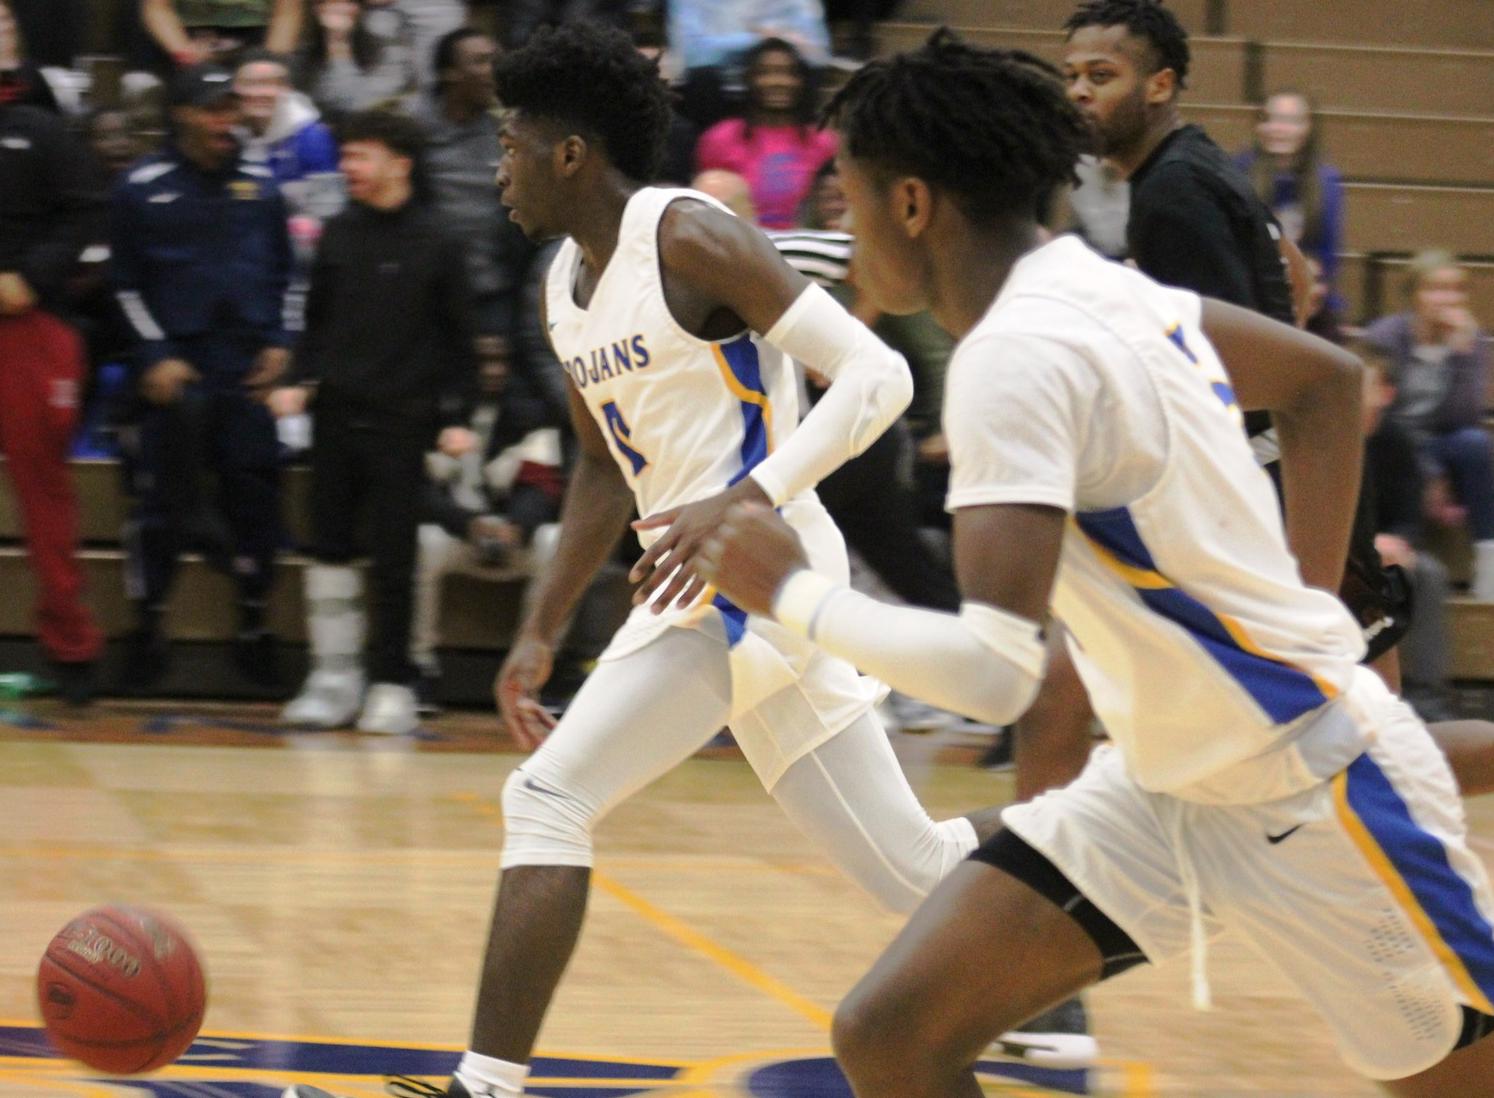 NIACC's James Harris and Quentin Hardrict run the fast break in Wednesday's victory.